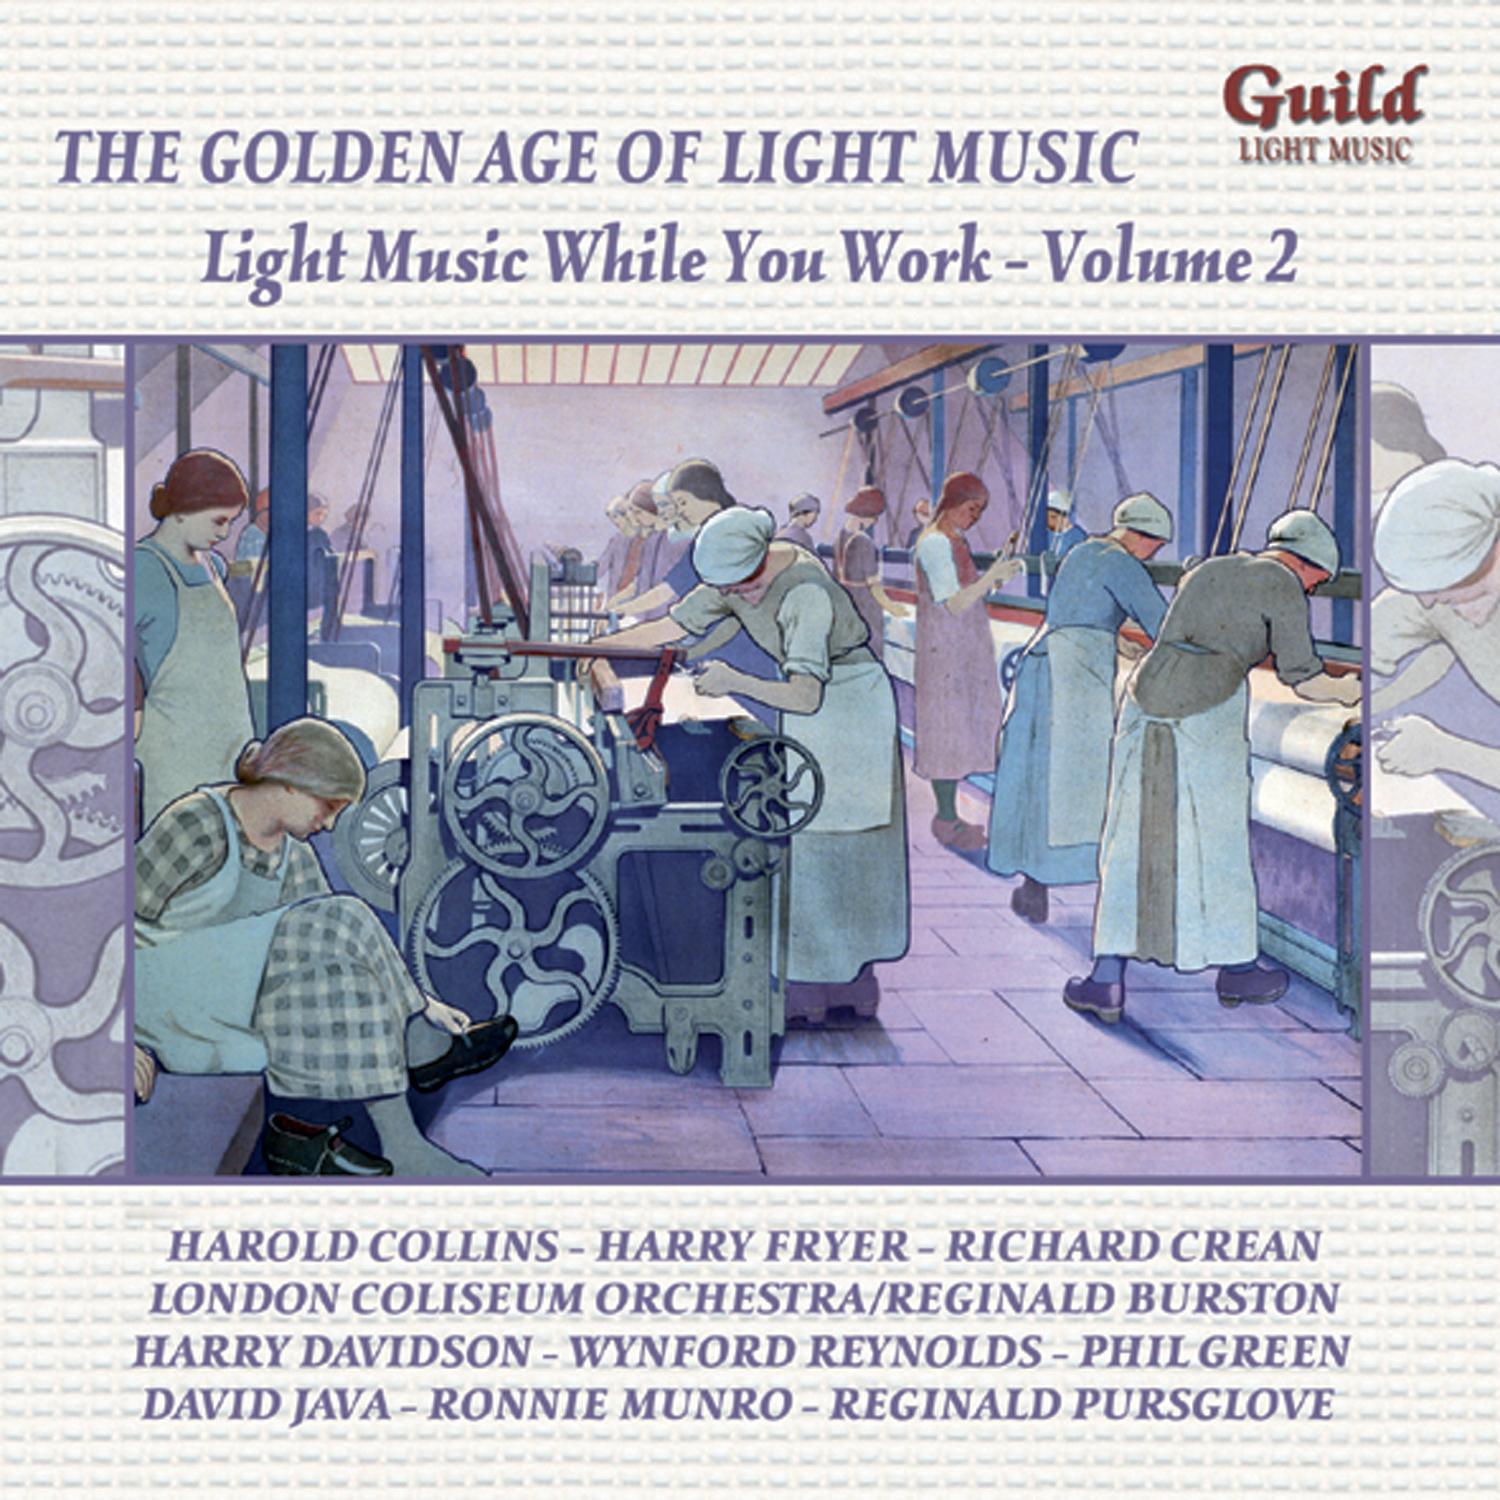 The Golden Age of Light Music: Light Music While You Work - Vol. 2